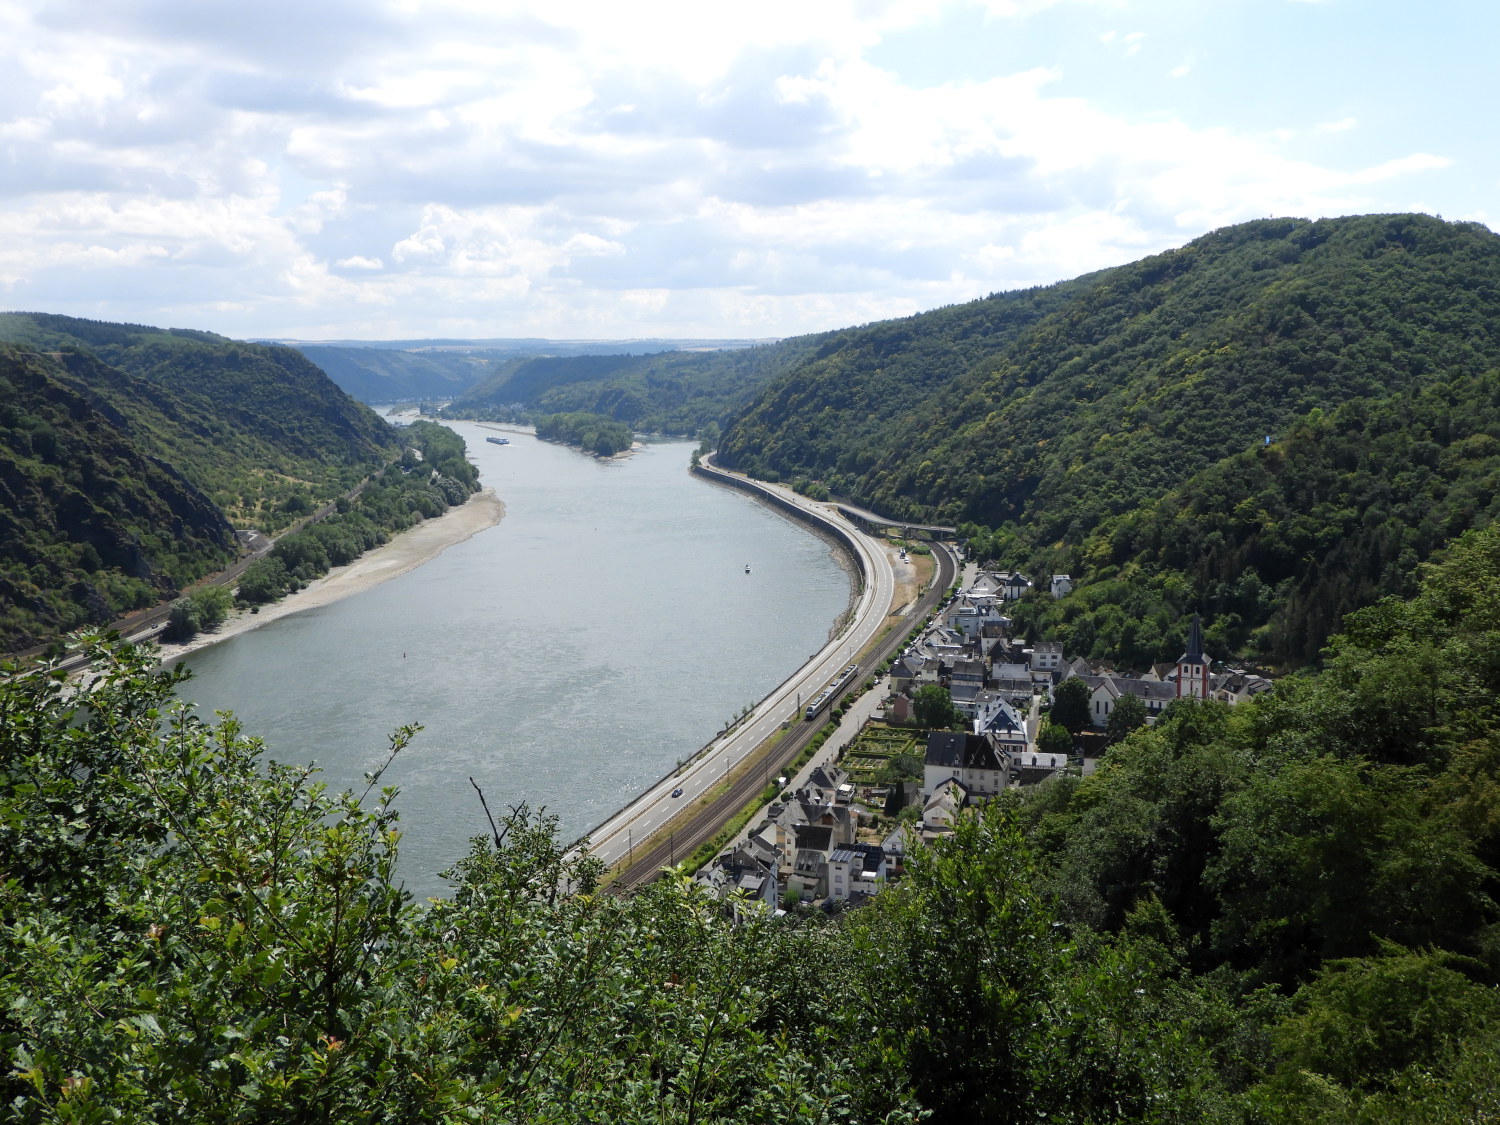 View of Hirzenach and the Rhine